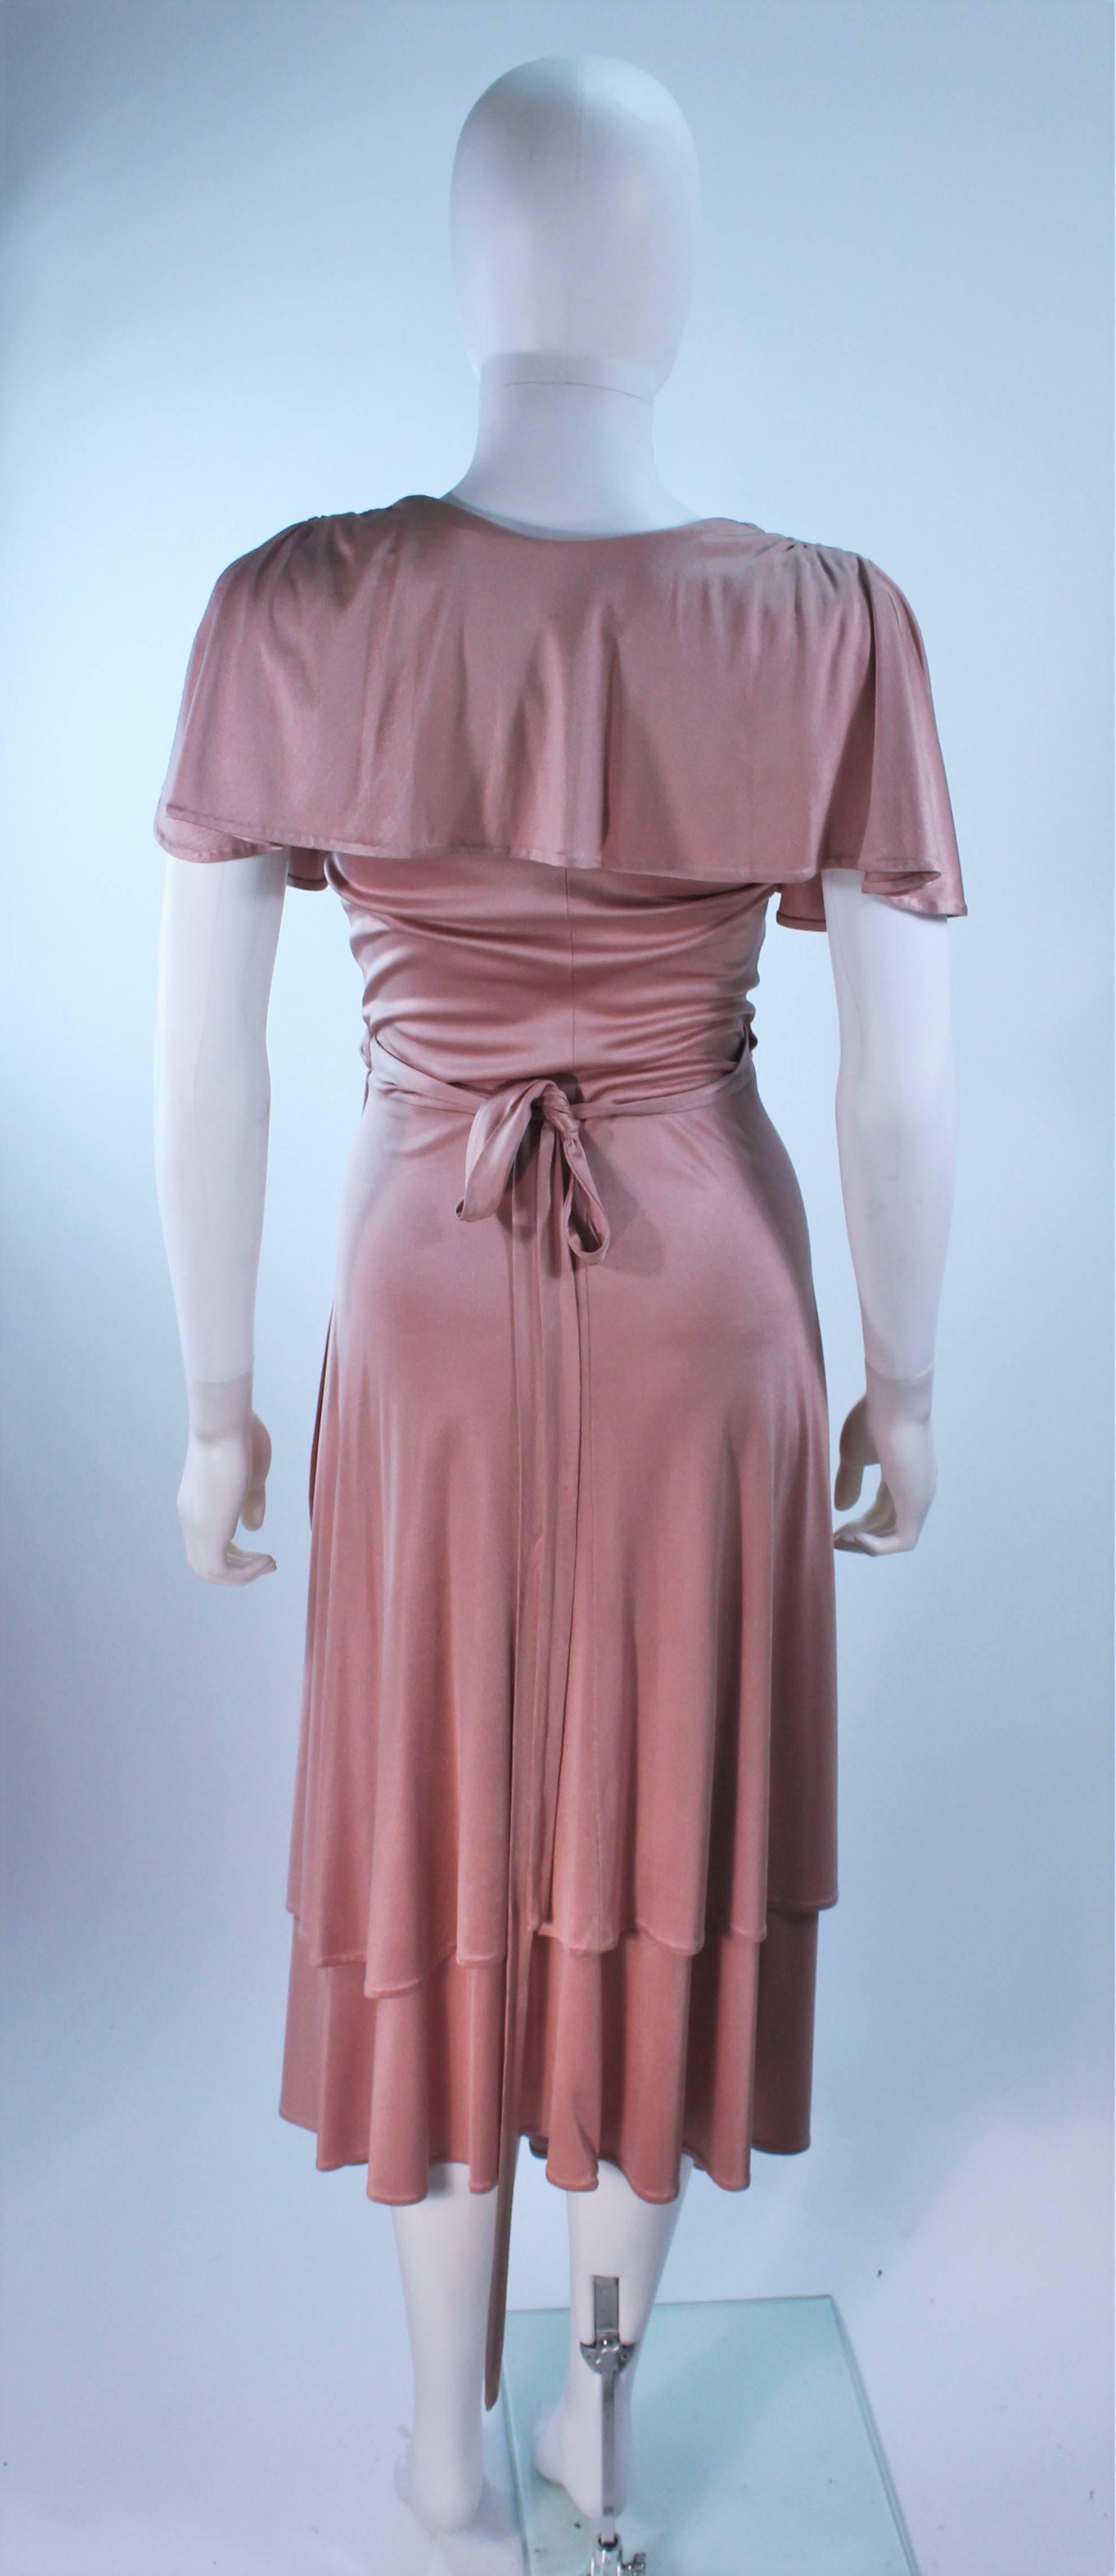 ELIZABETH MASON COUTURE Blush Silk Jersey Ruffled Cocktail Dress Made to Order For Sale 4